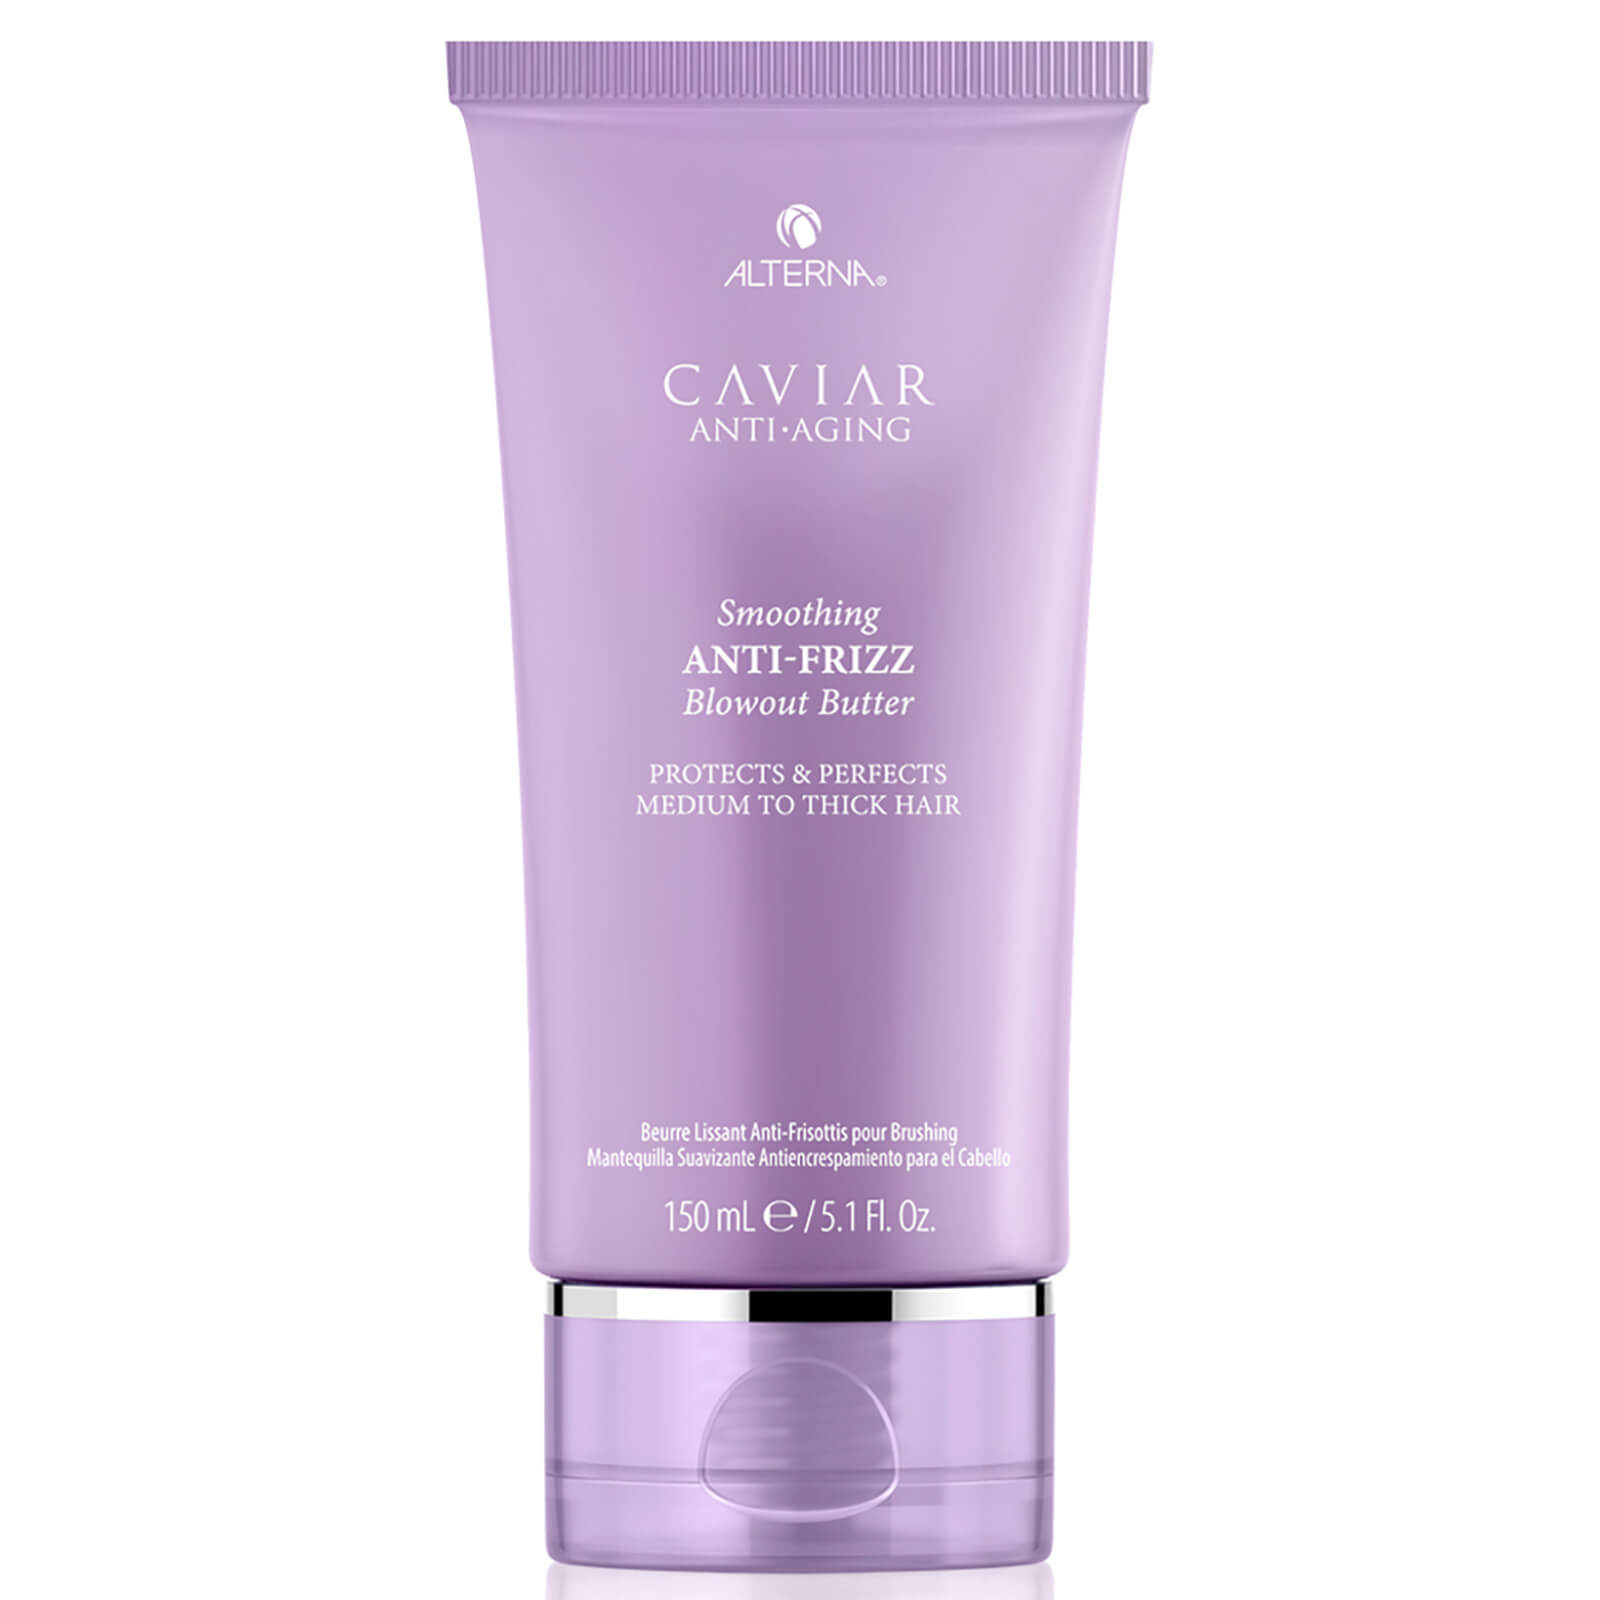 ALTERNA Caviar Smoothing Anti-Frizz Blow out Butter 150ml